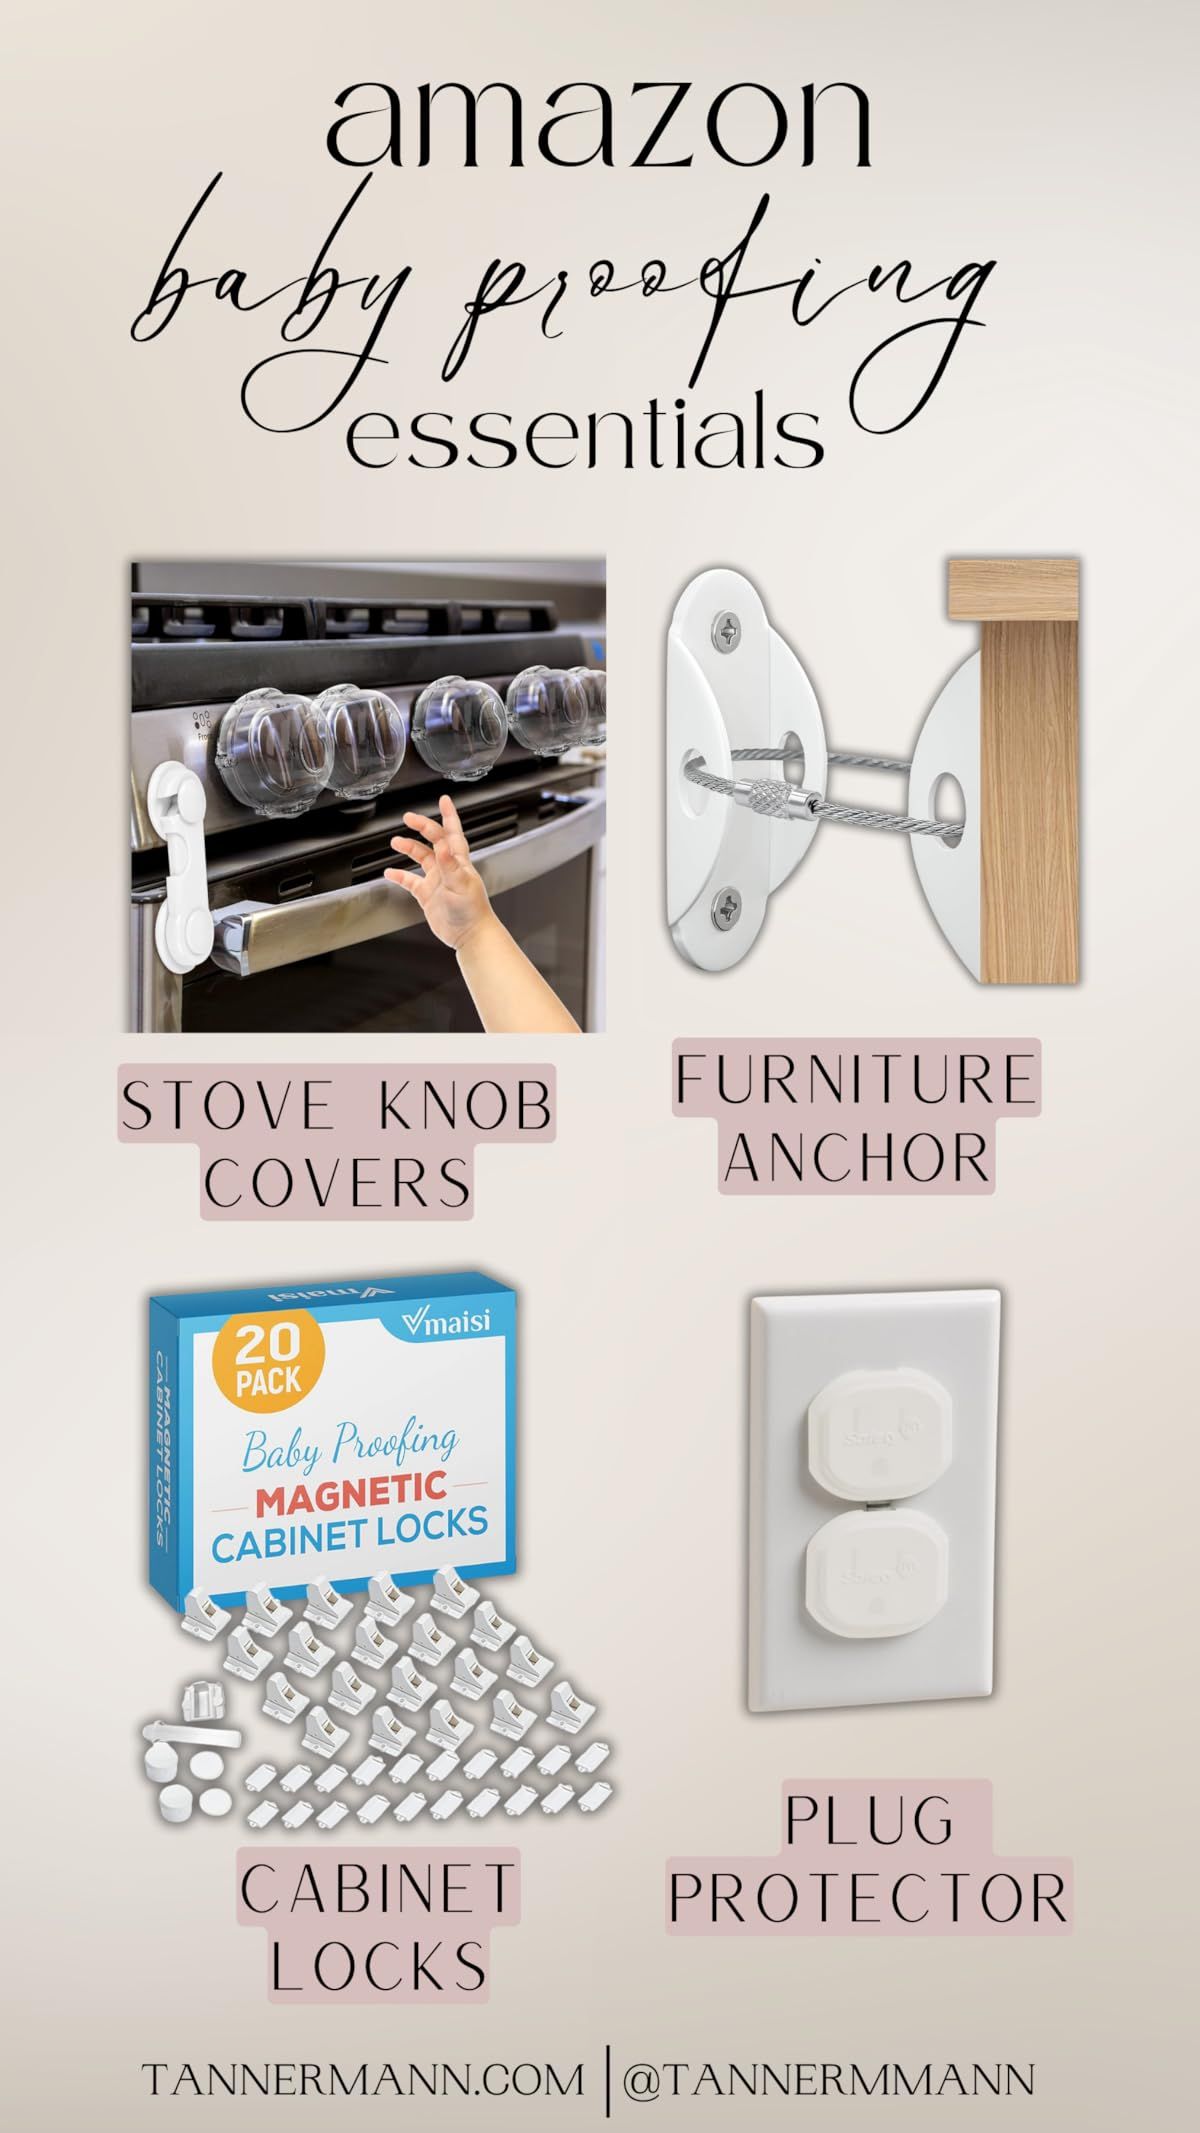 Mom's Choice Gold Awards Winner - Stove Knob Covers for Child Safety (5 + 1 Pack) Double-Key Design and Upgraded Universal Size Gas Knob Covers Clear View Childproof Oven Knob Covers for Kids and Pets | Amazon (US)